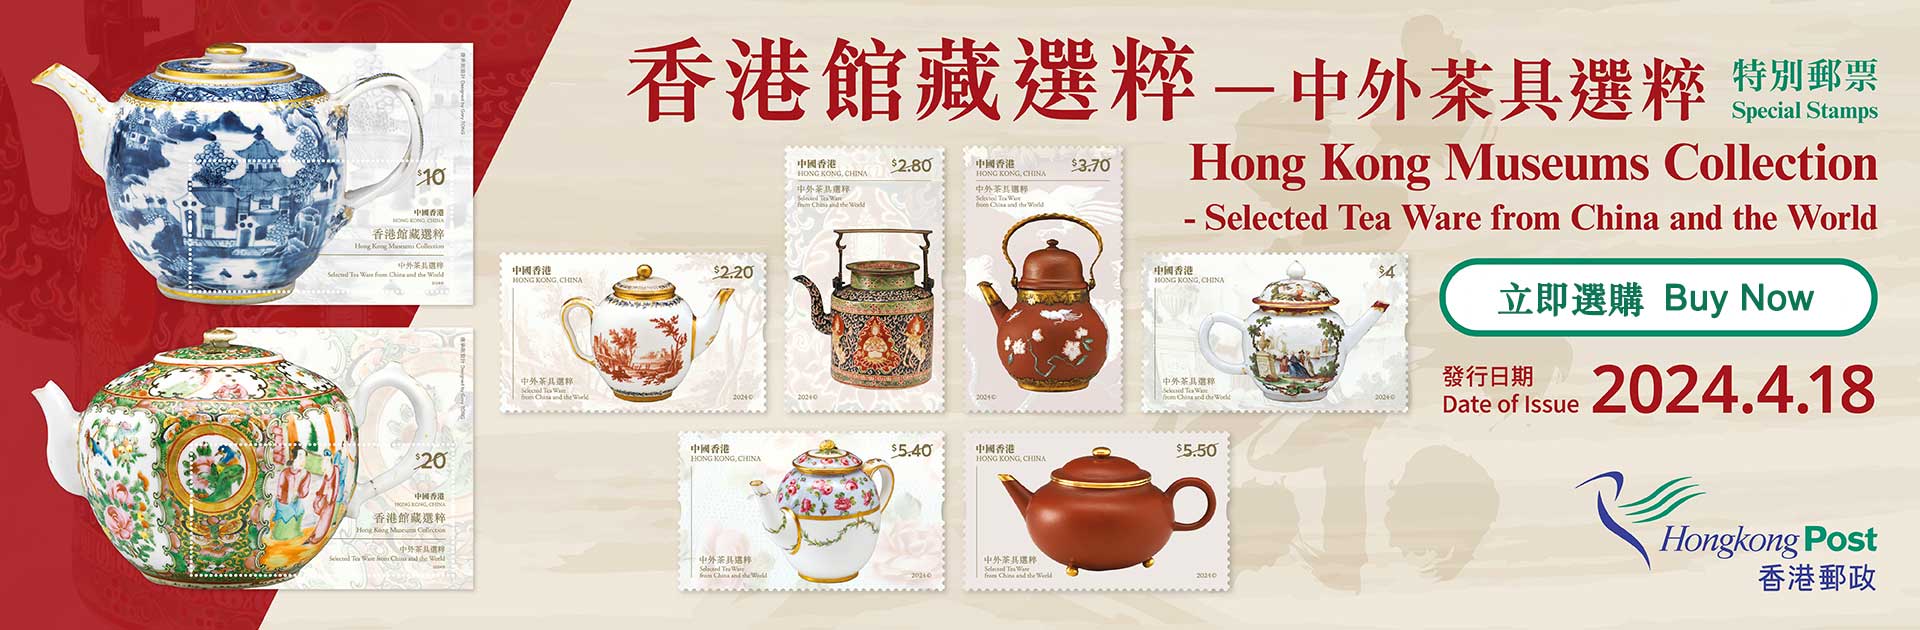 “Hong Kong Museums Collection – Selected Tea Ware from China and the World” Special Stamps